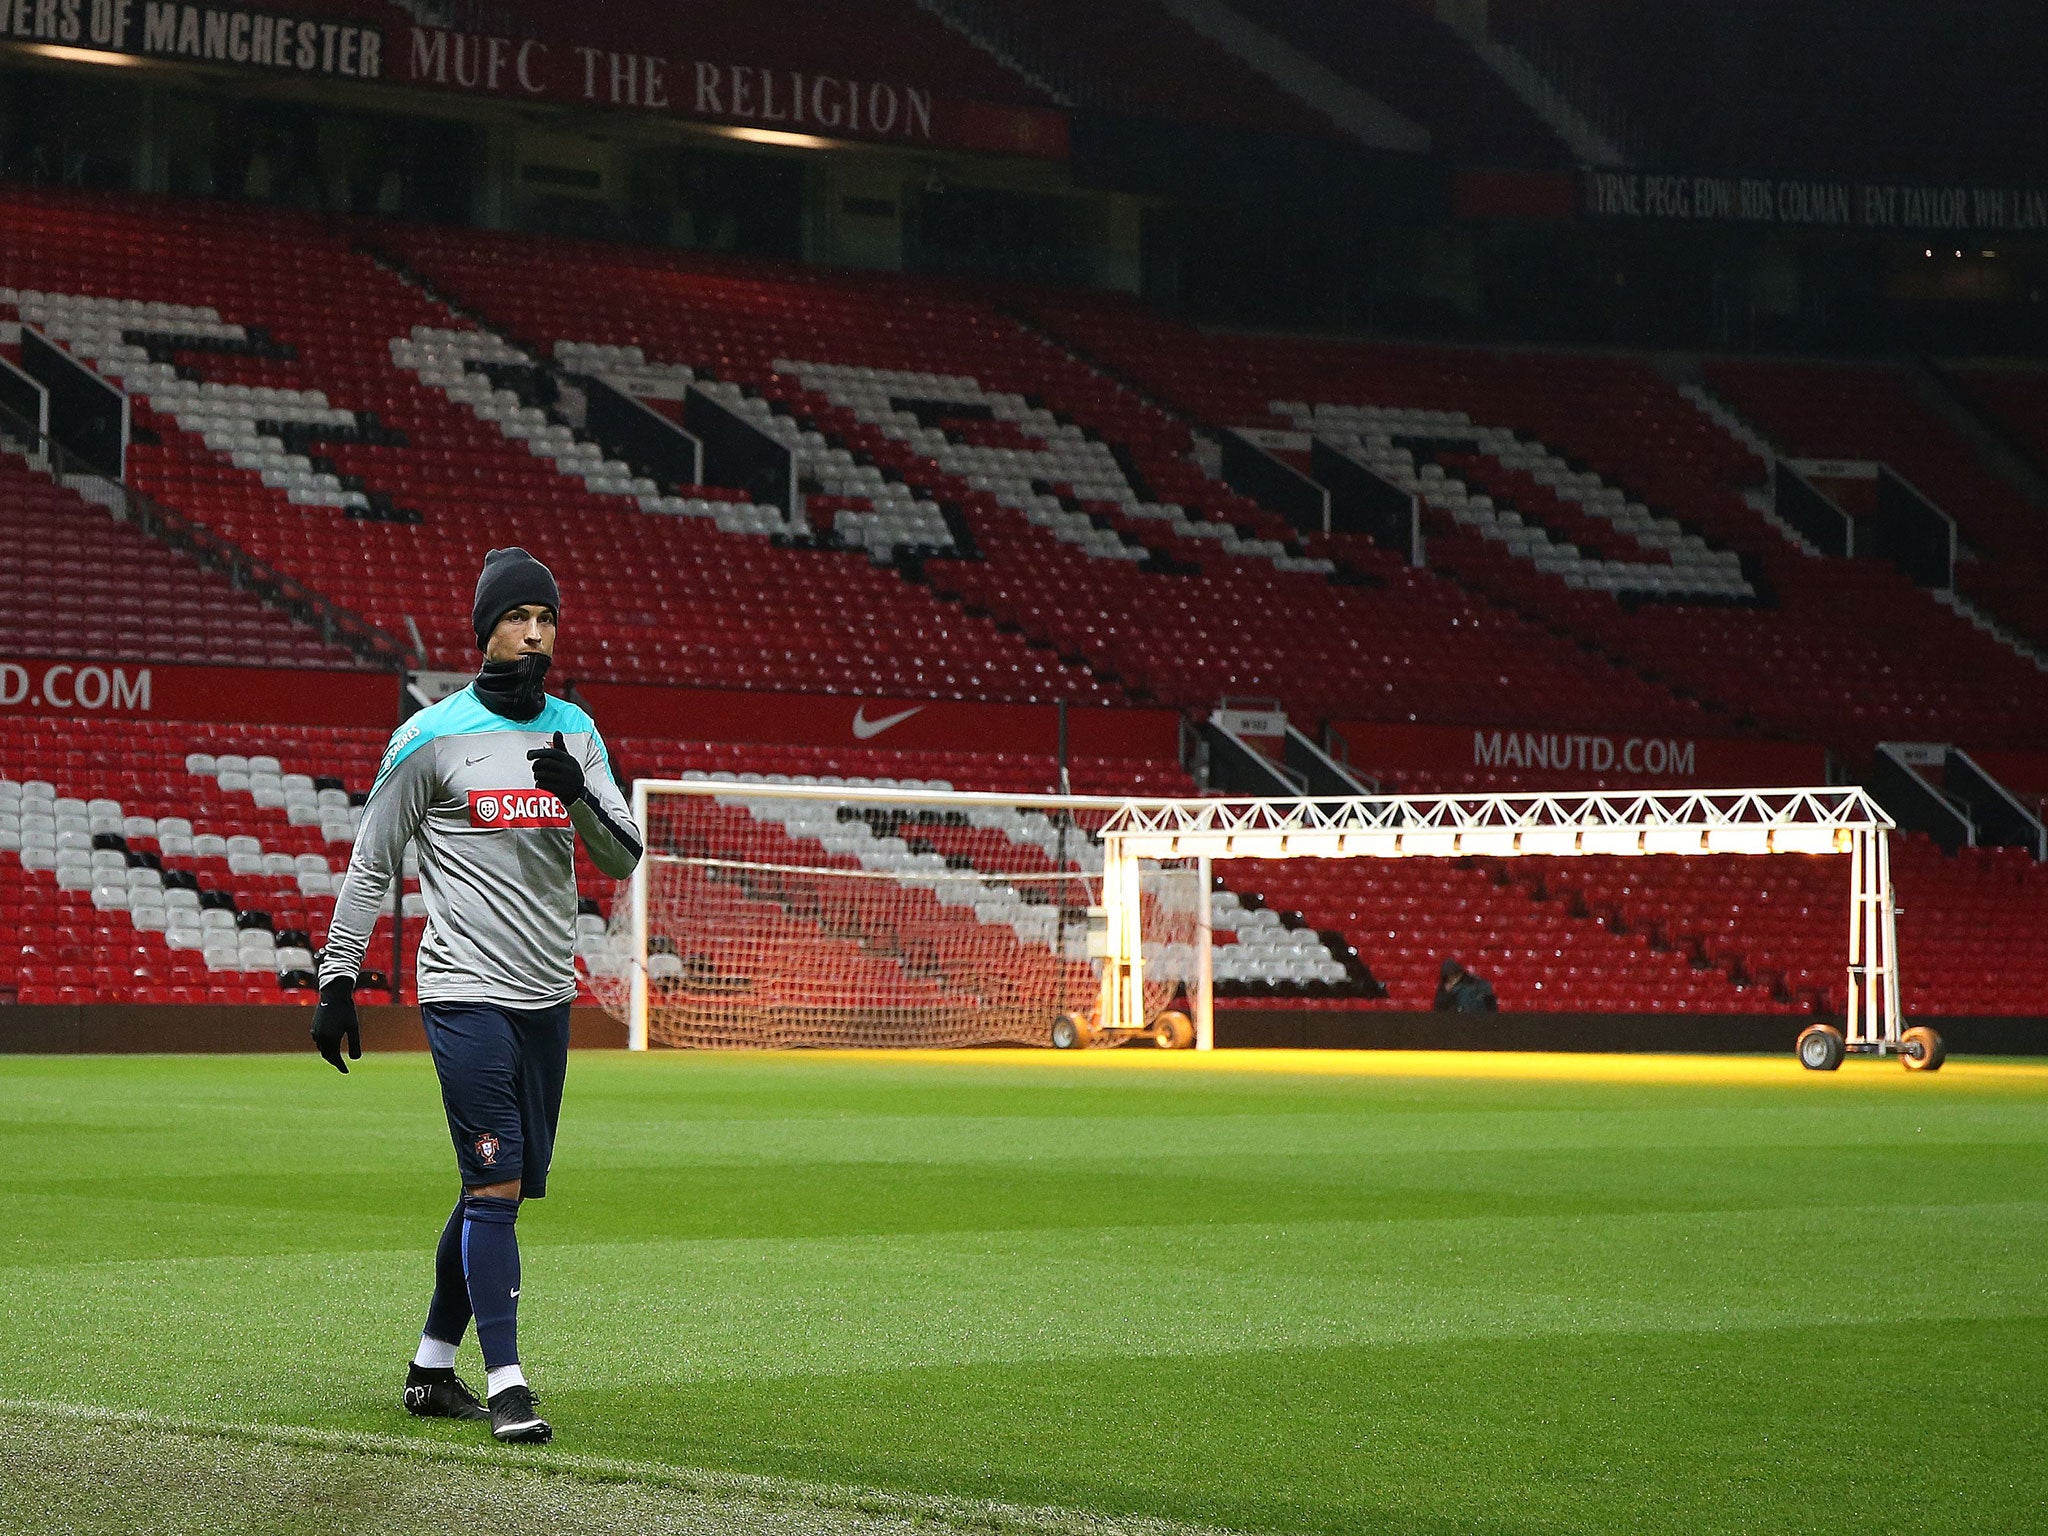 Cristiano Ronaldo trains on the pitch at Old Trafford